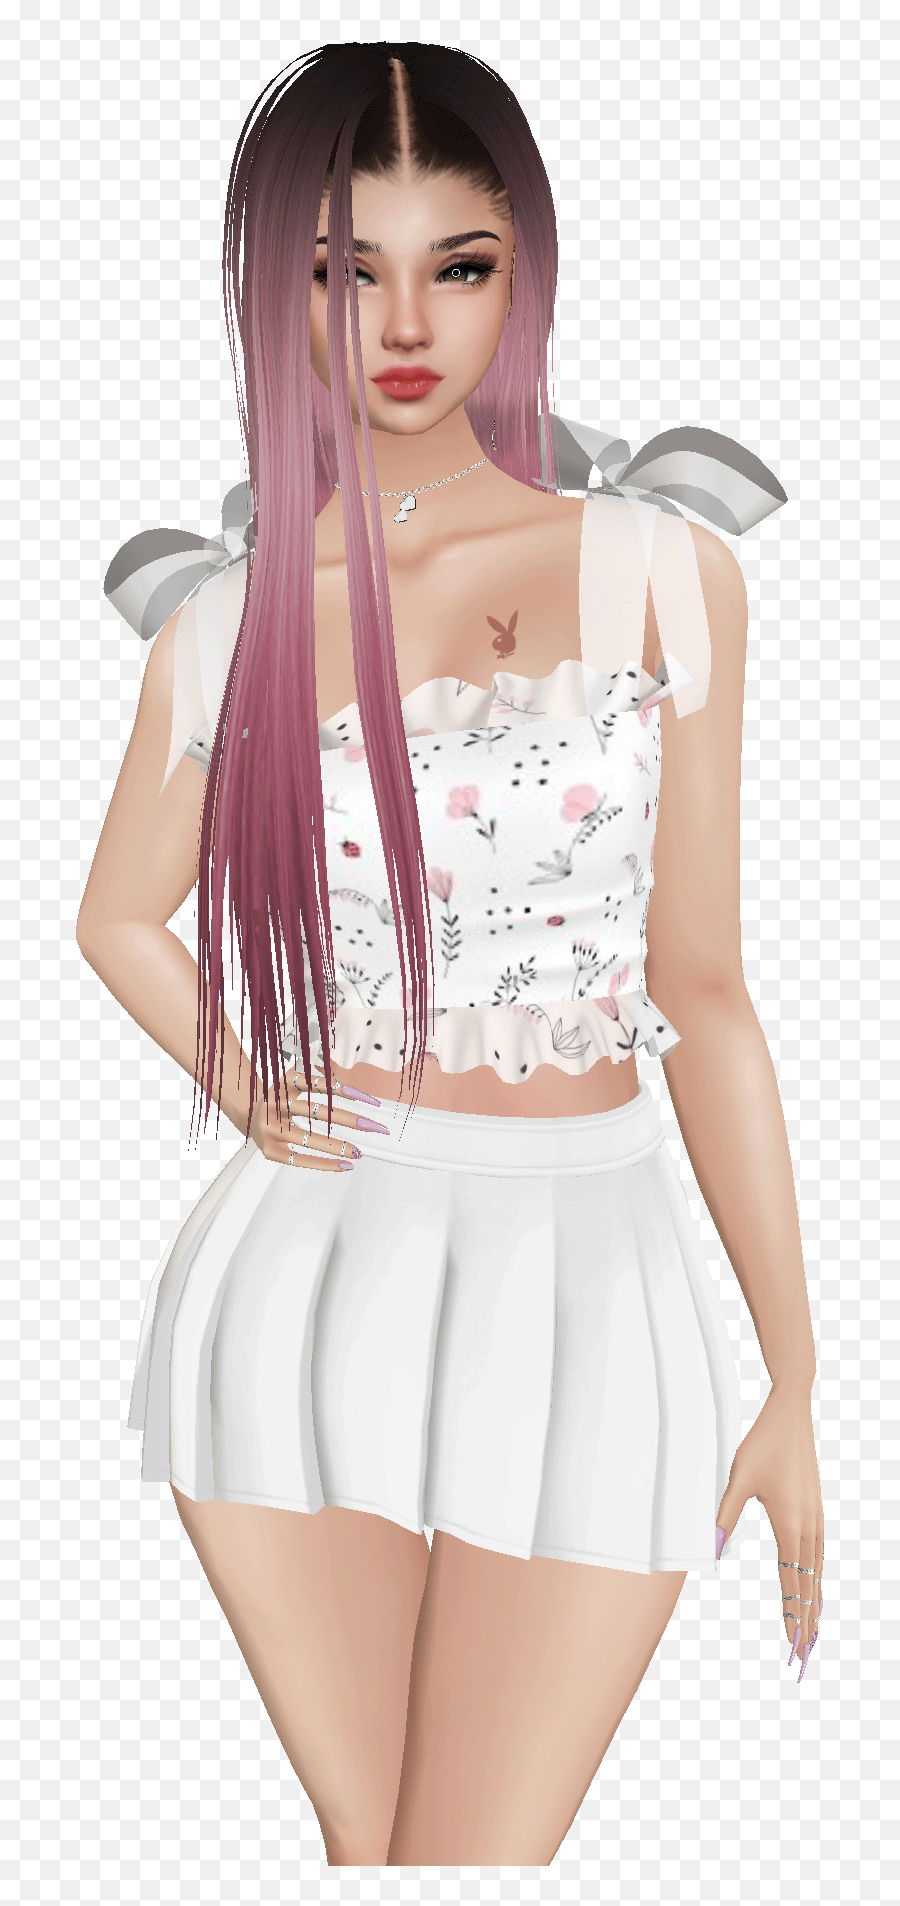 Cindy Free Download Borrow And Streaming Internet Archive - Girly Png,Imvu Icon Download